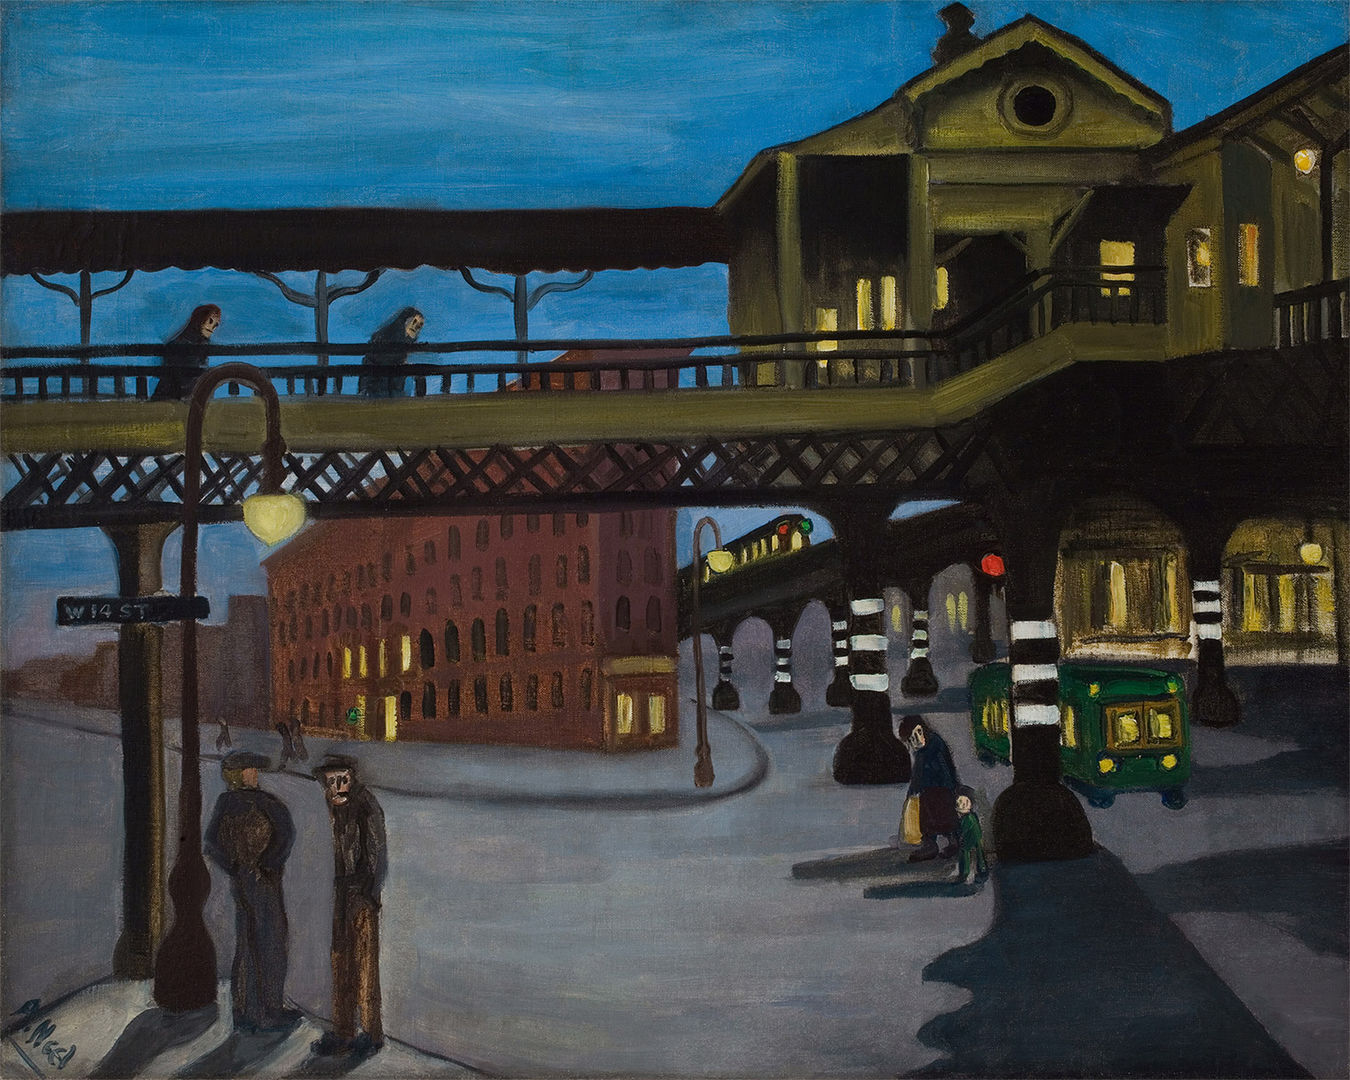 A painting of a city scene beneath an elevated train